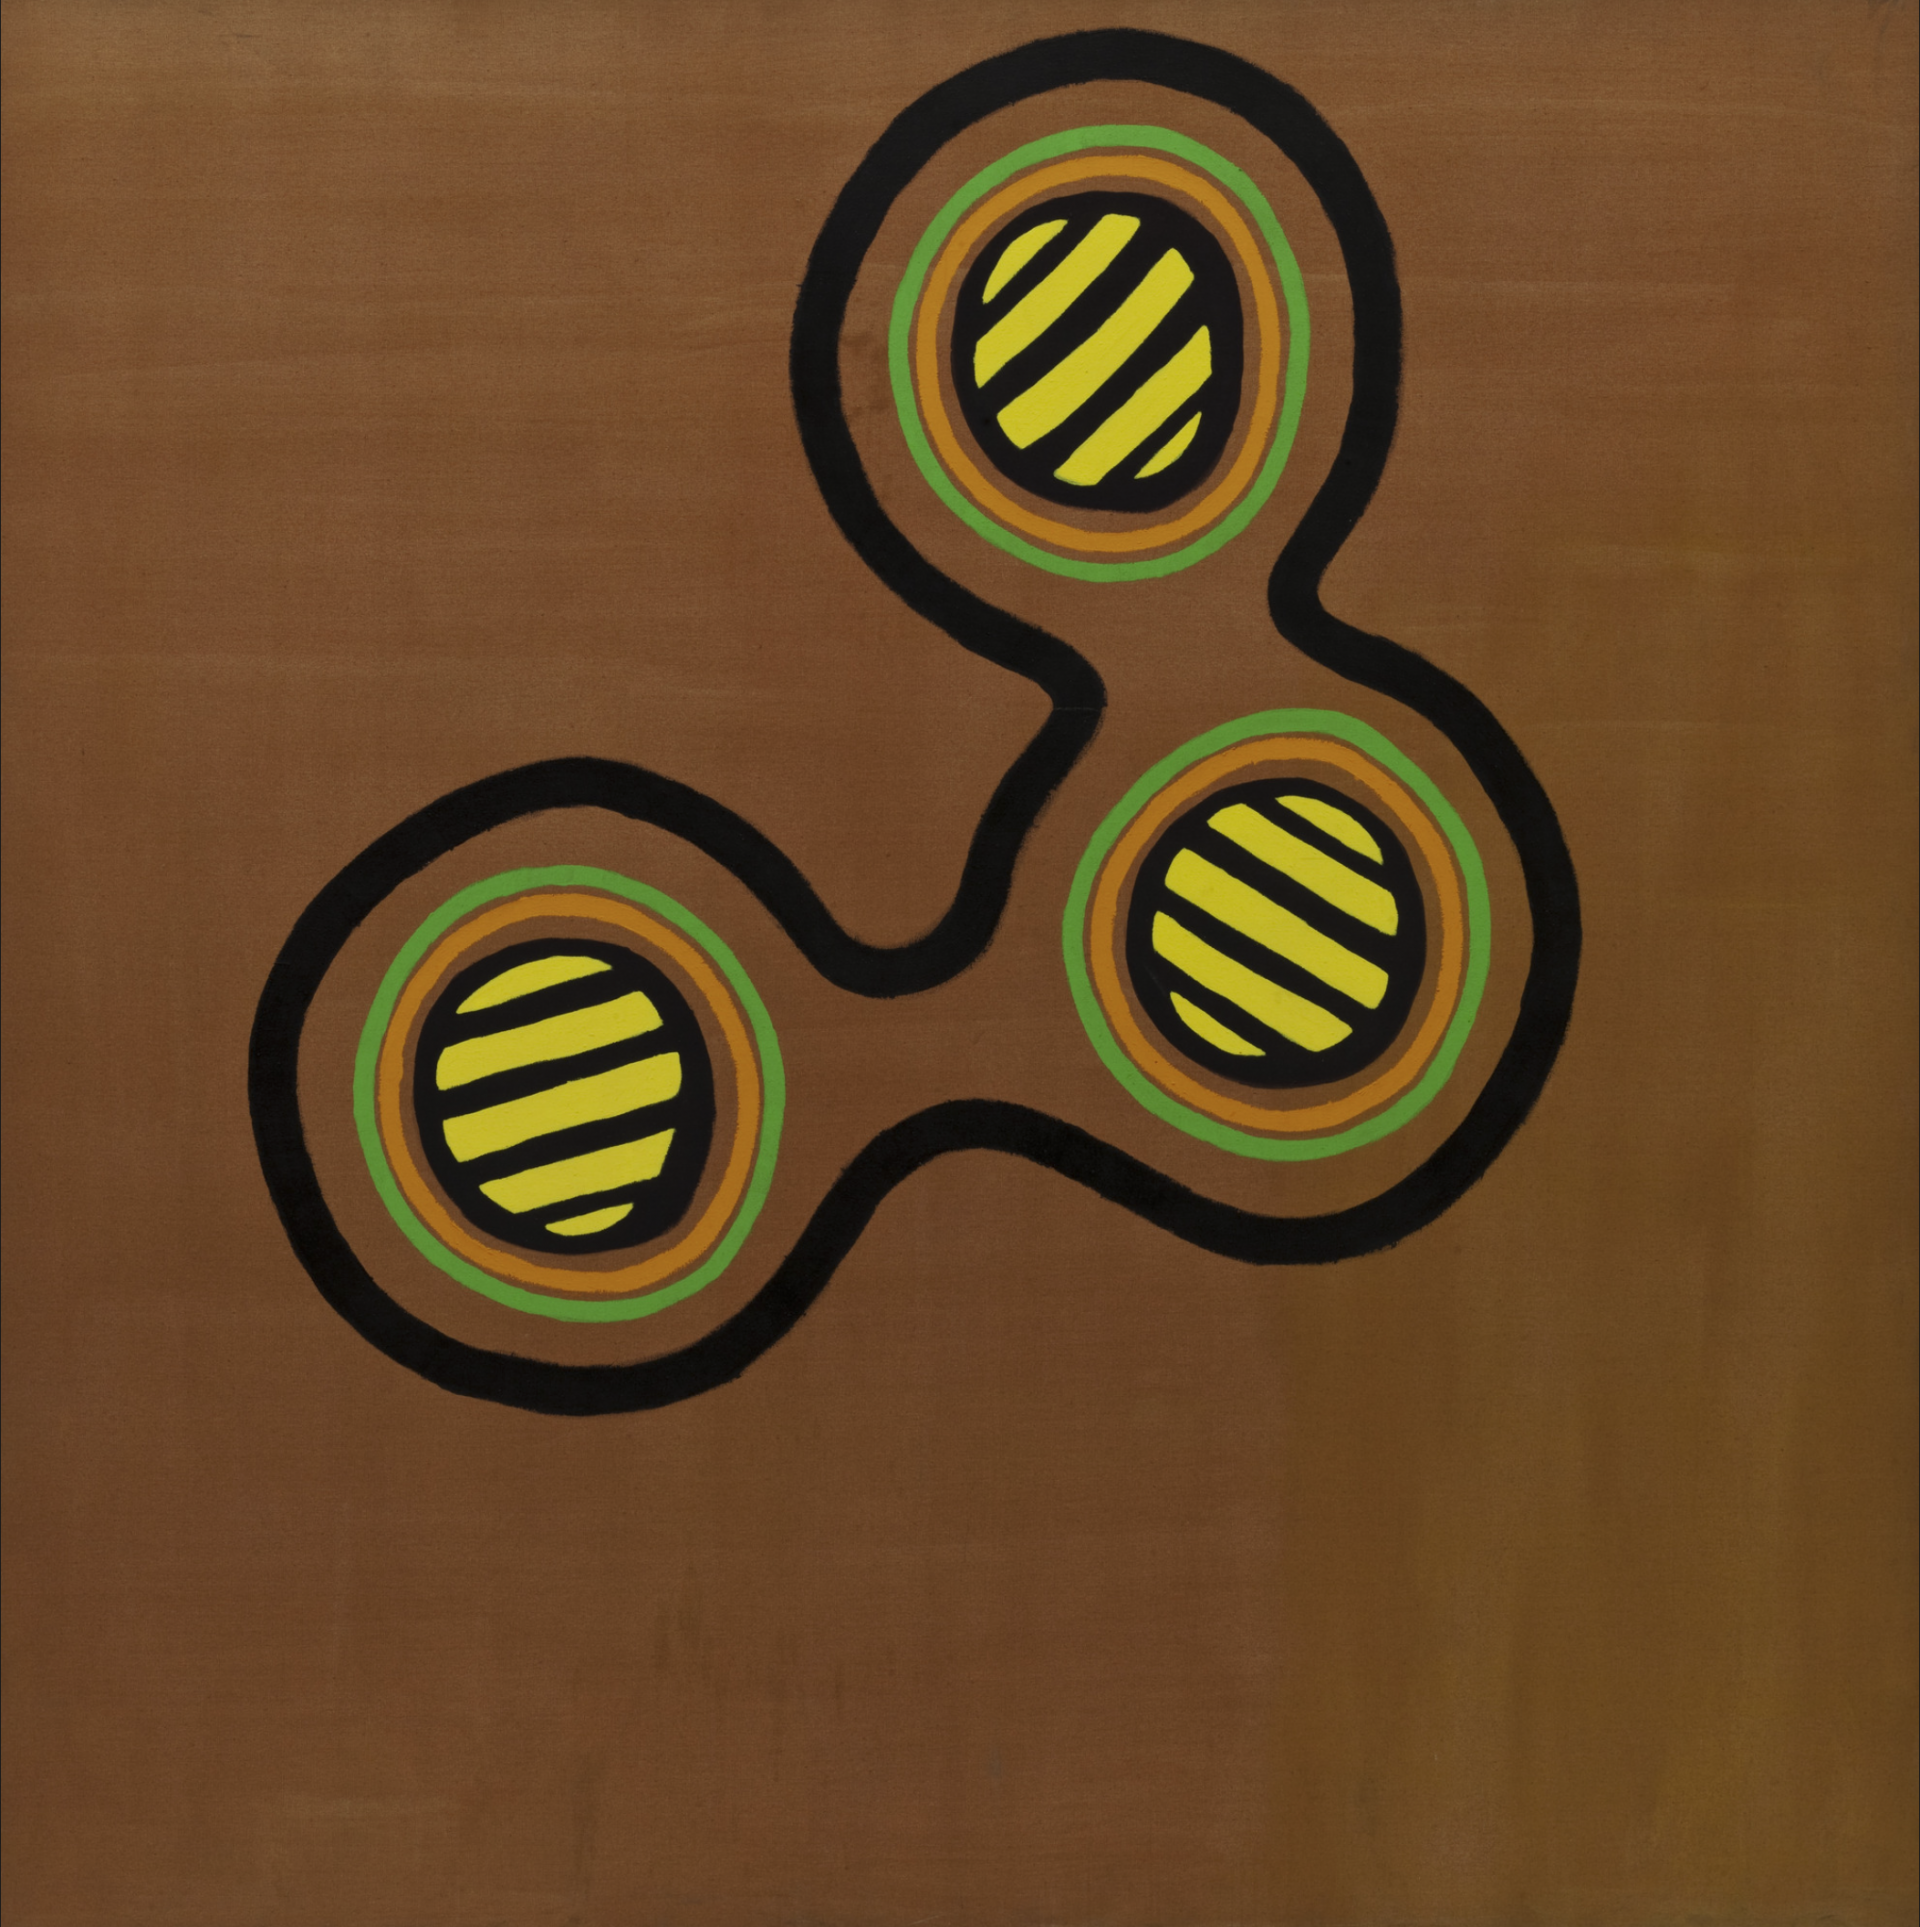 "The Whole World Has Gone Surfing" by Edward Avedisian, 1963, an abstract painting with a triangular composition of three connected circles with yellow stripes on a brown background.